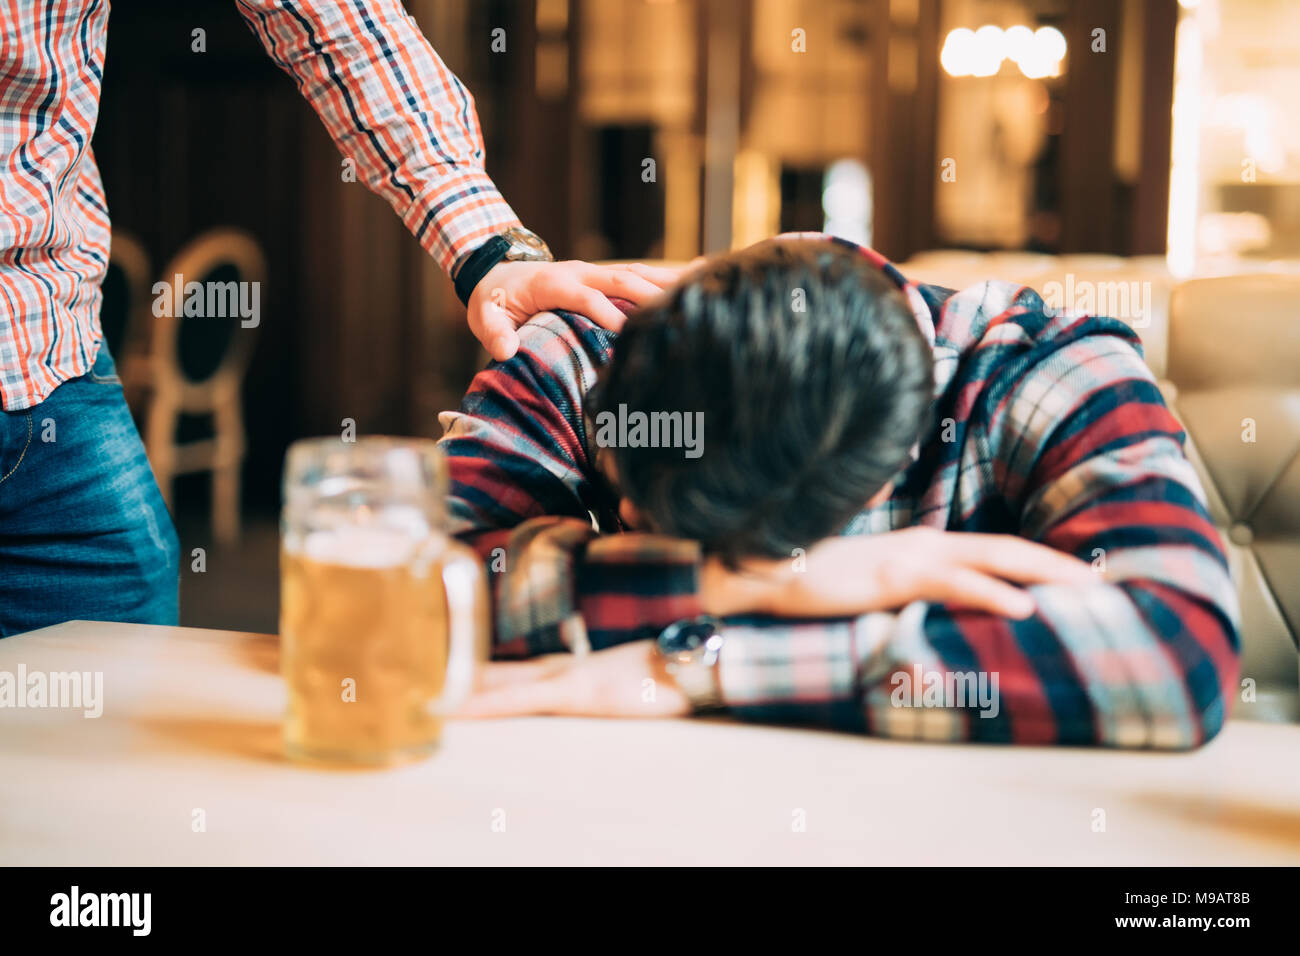 people, leisure, friendship and party concept - man with beer waking his drunk friend sleeping on table at bar or pub Stock Photo